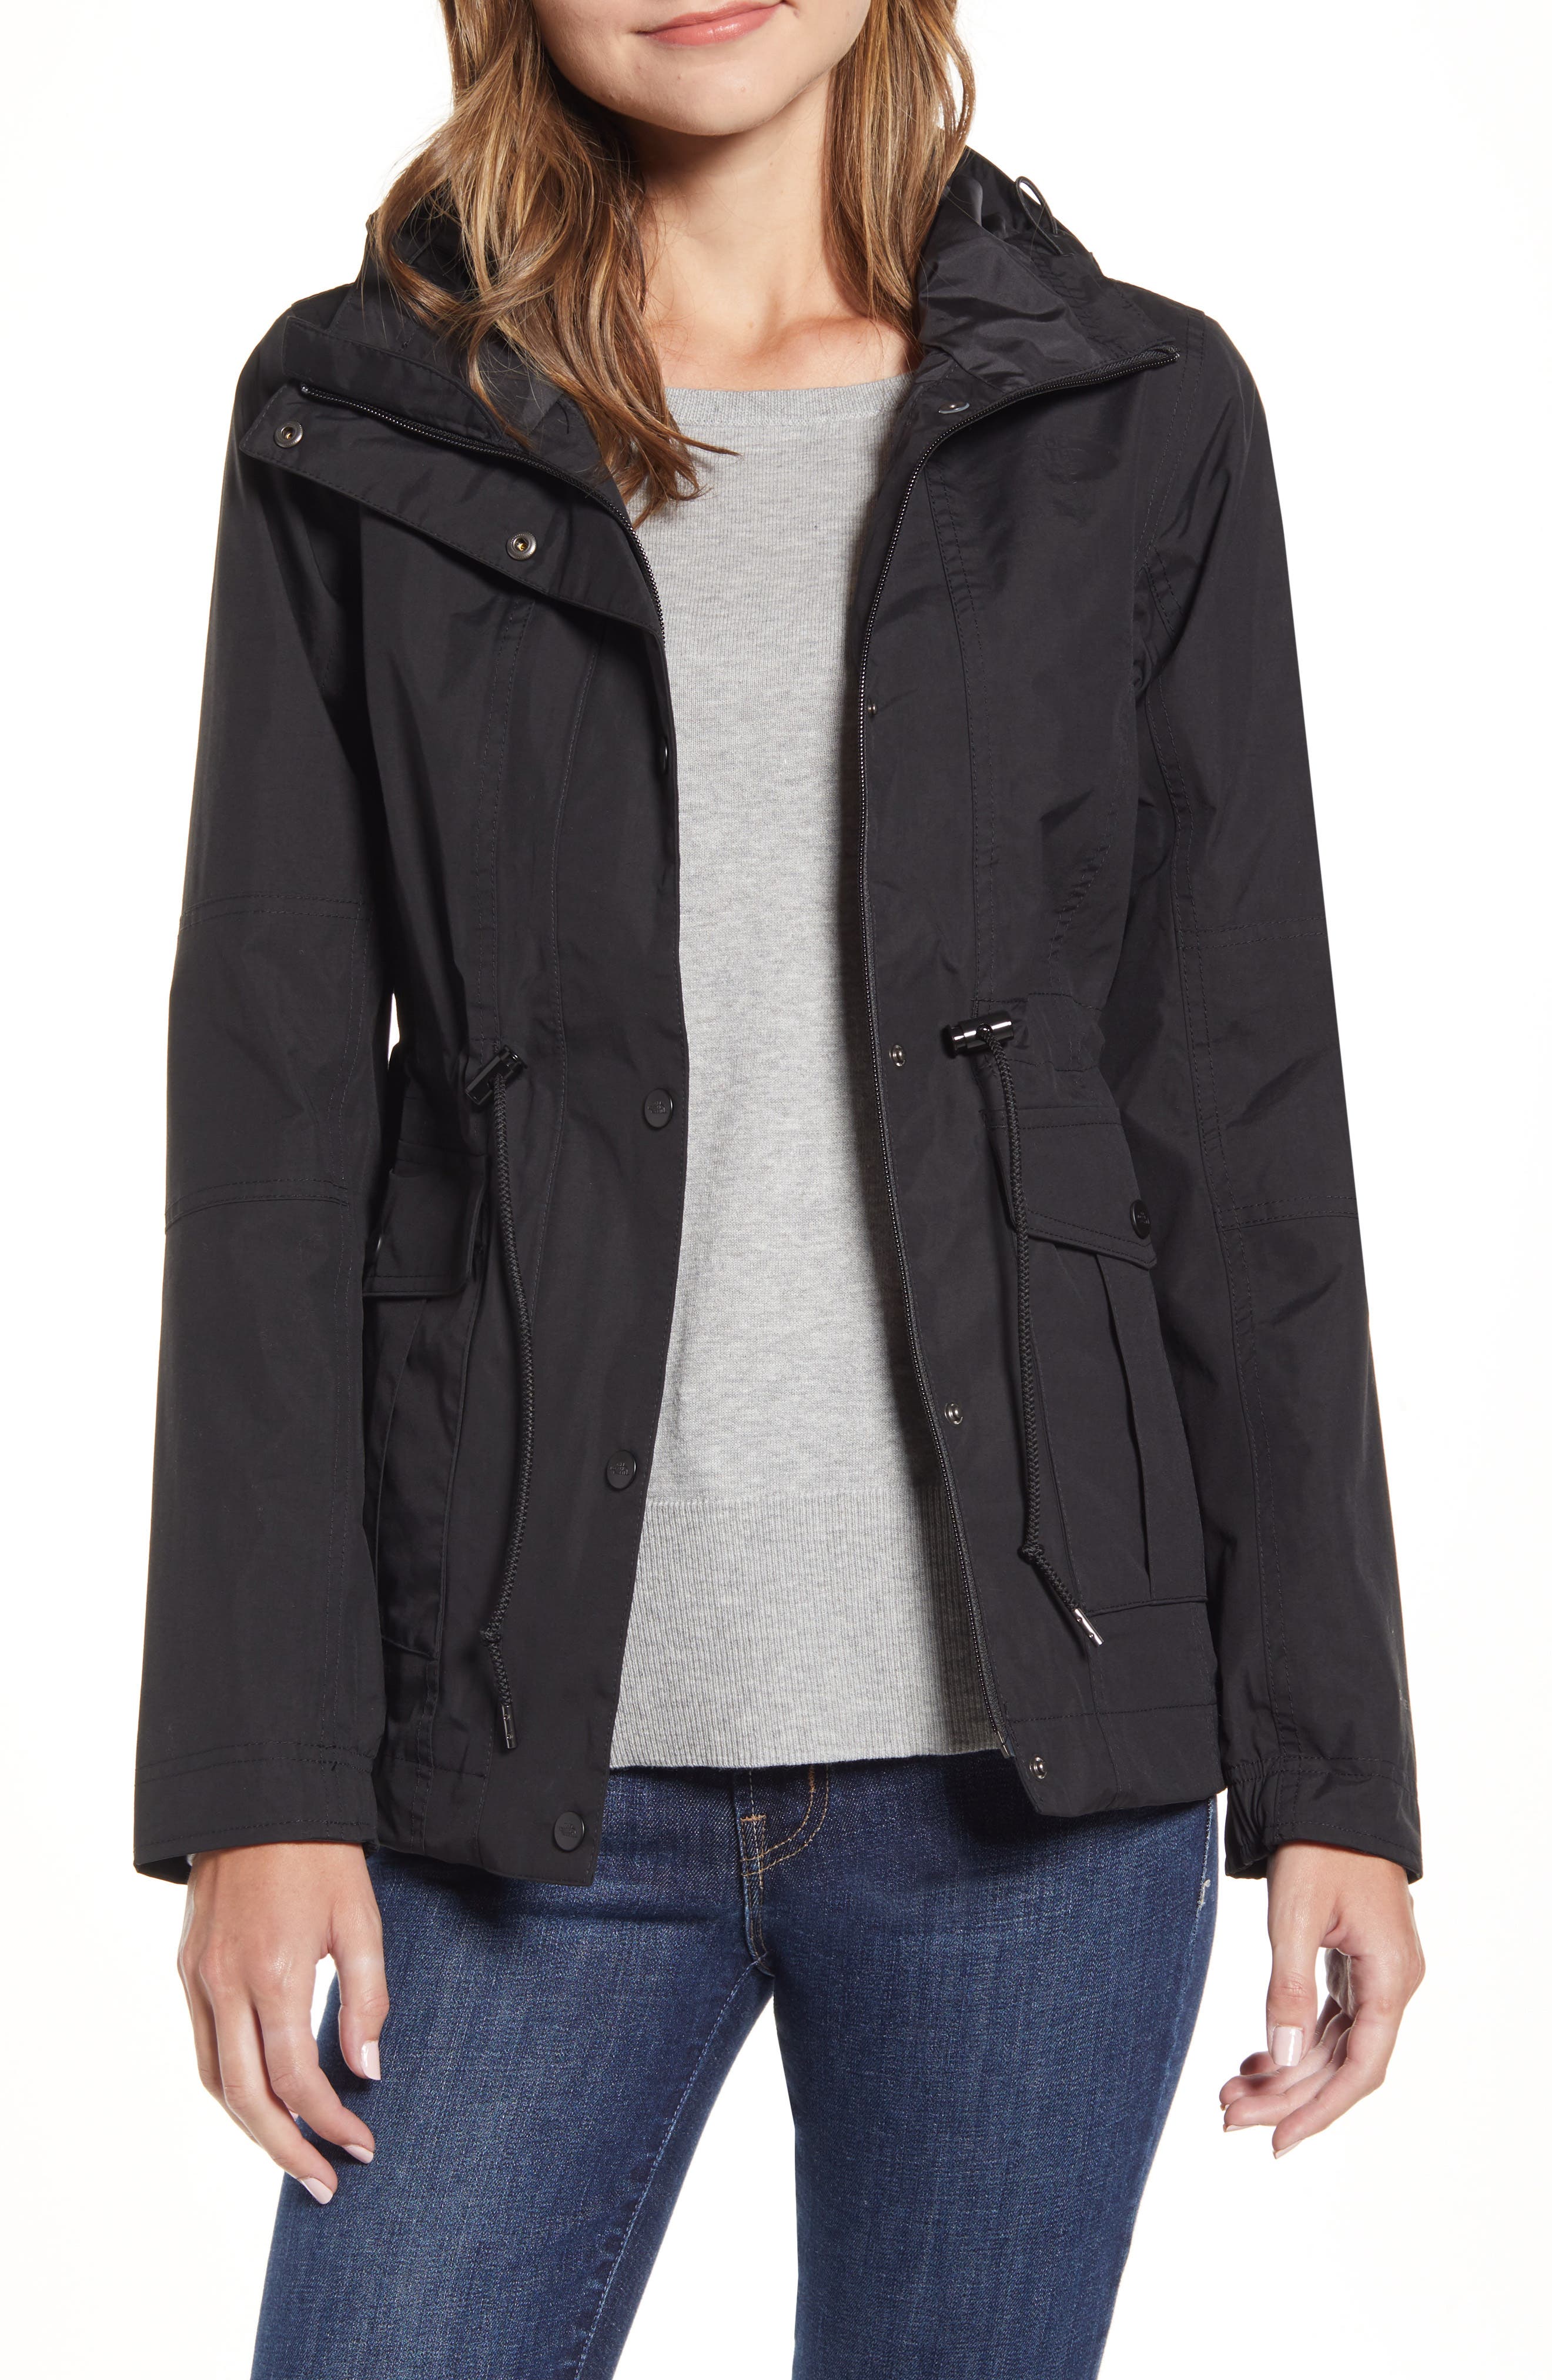 zoomie jacket north face